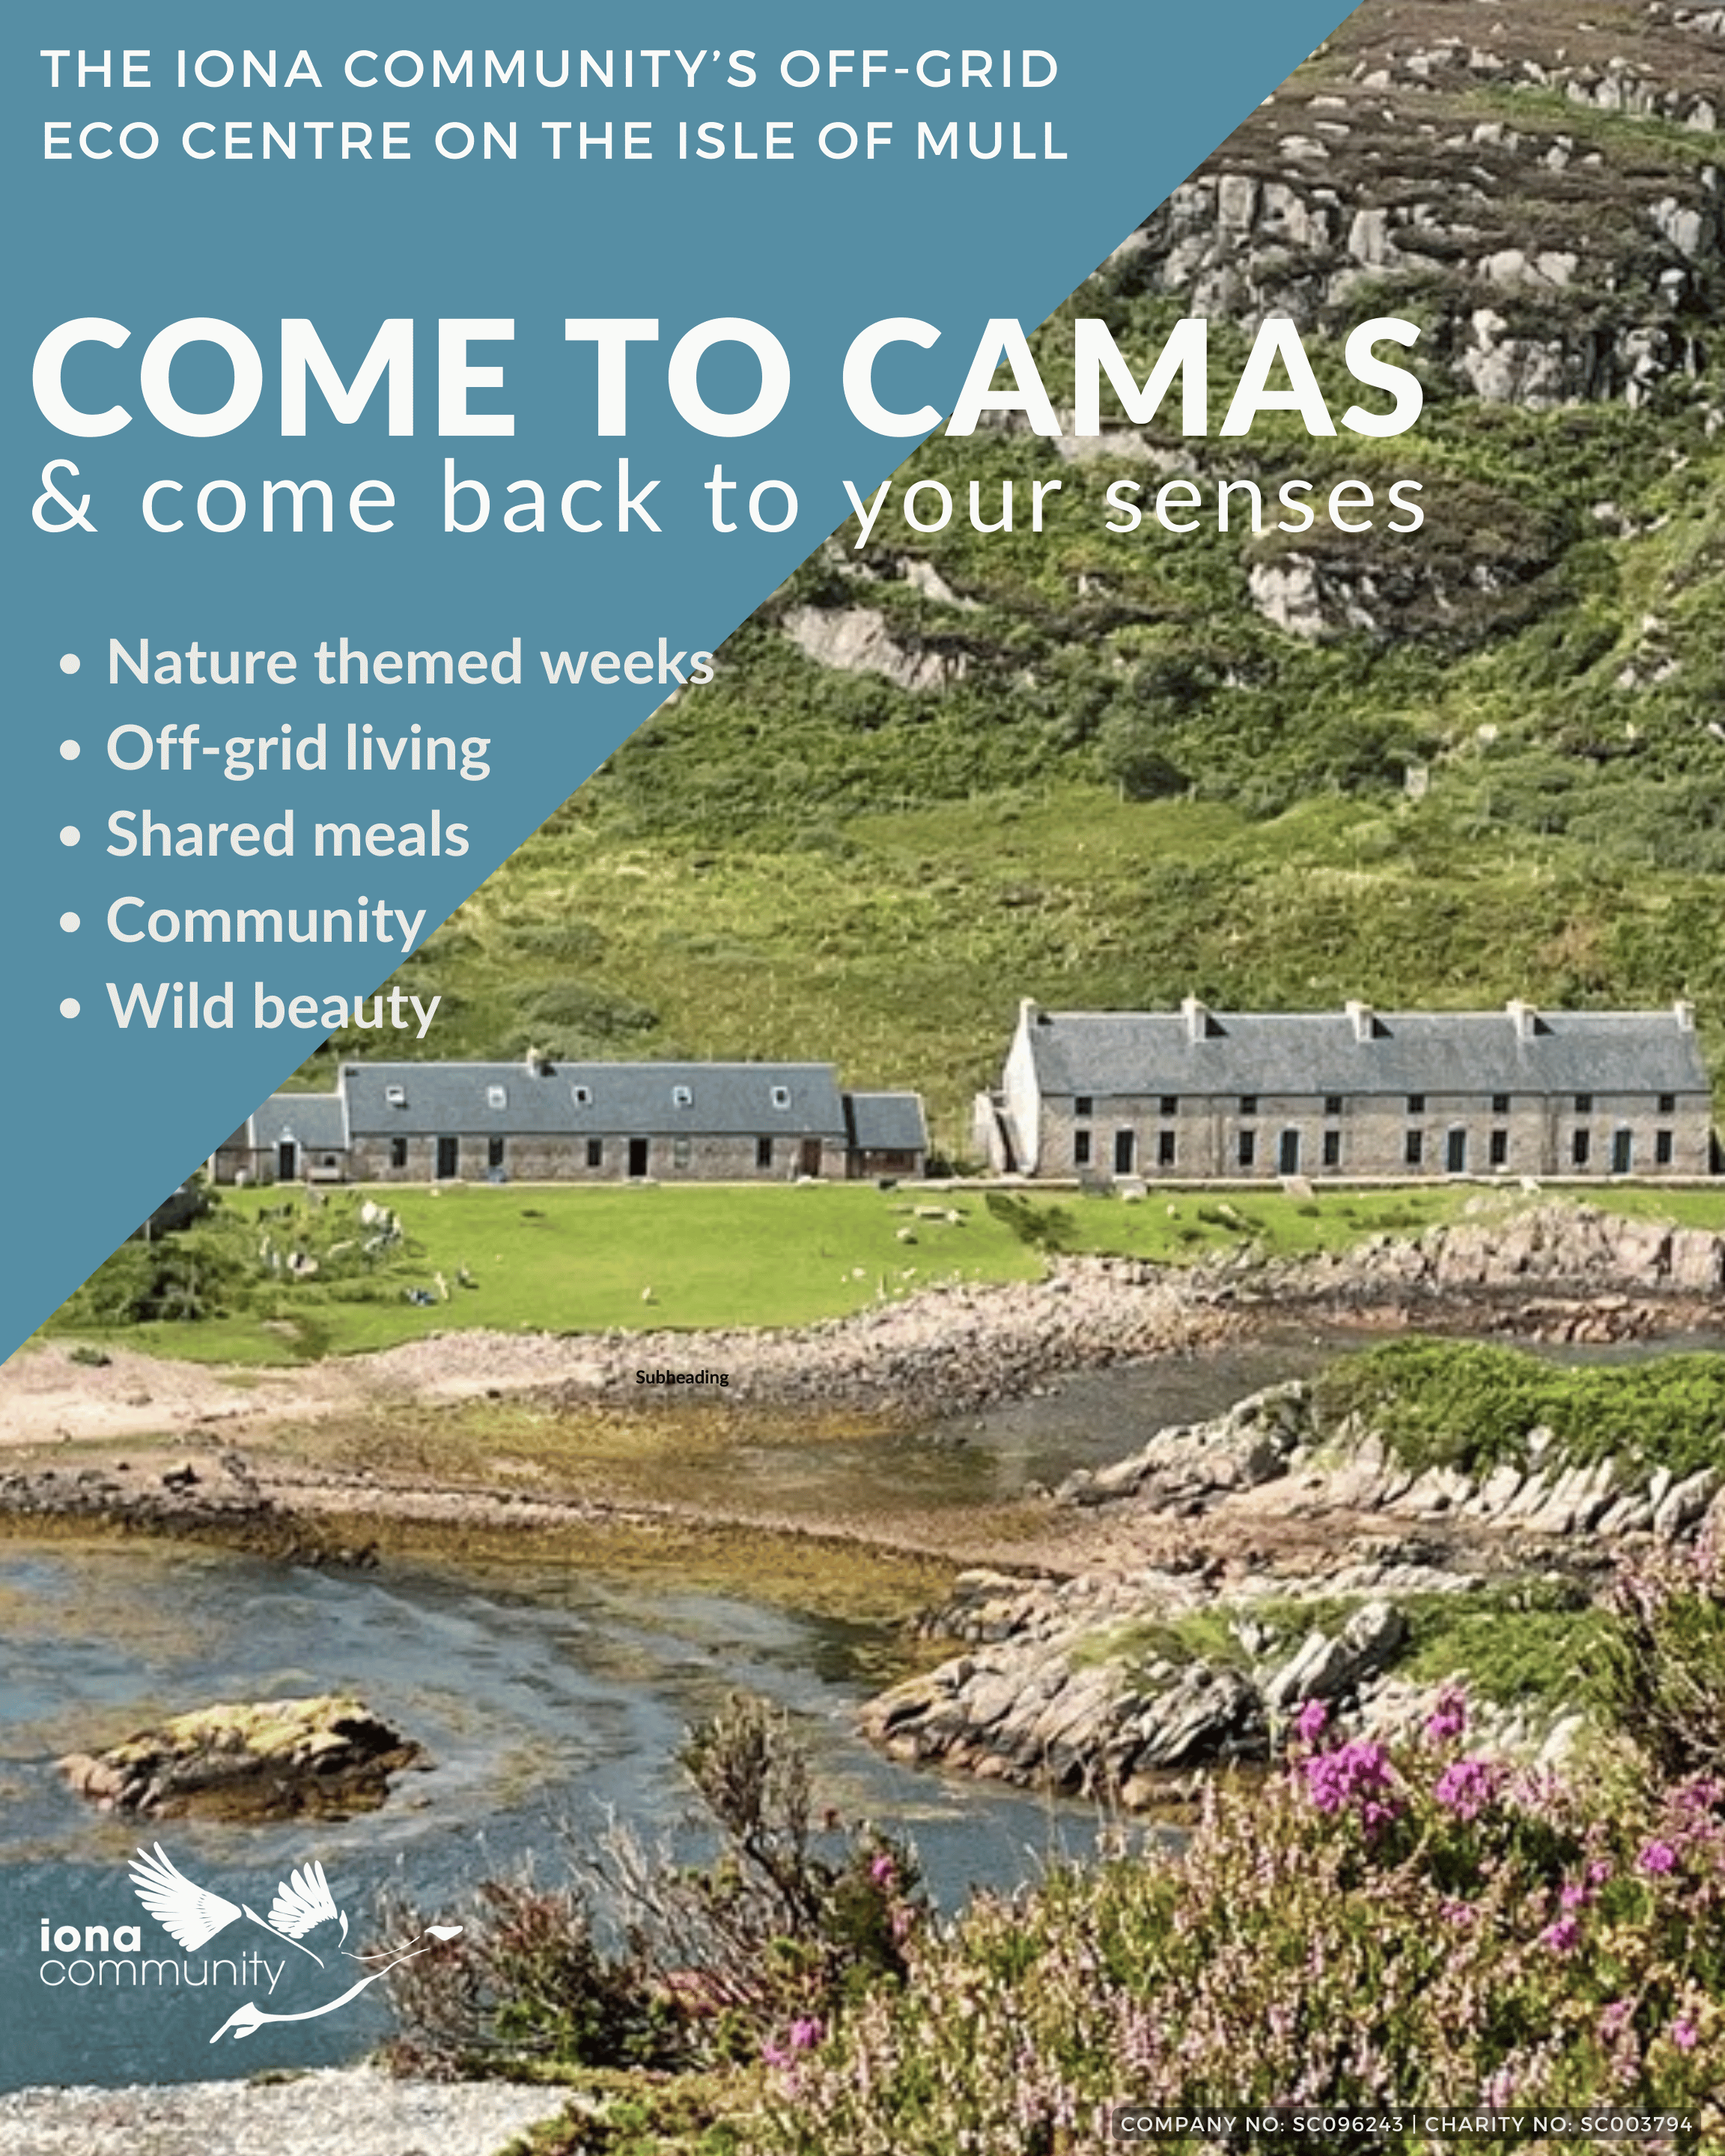 Take your pick from one of our nature themed weeks down the track at Camas Centre this Autumn.